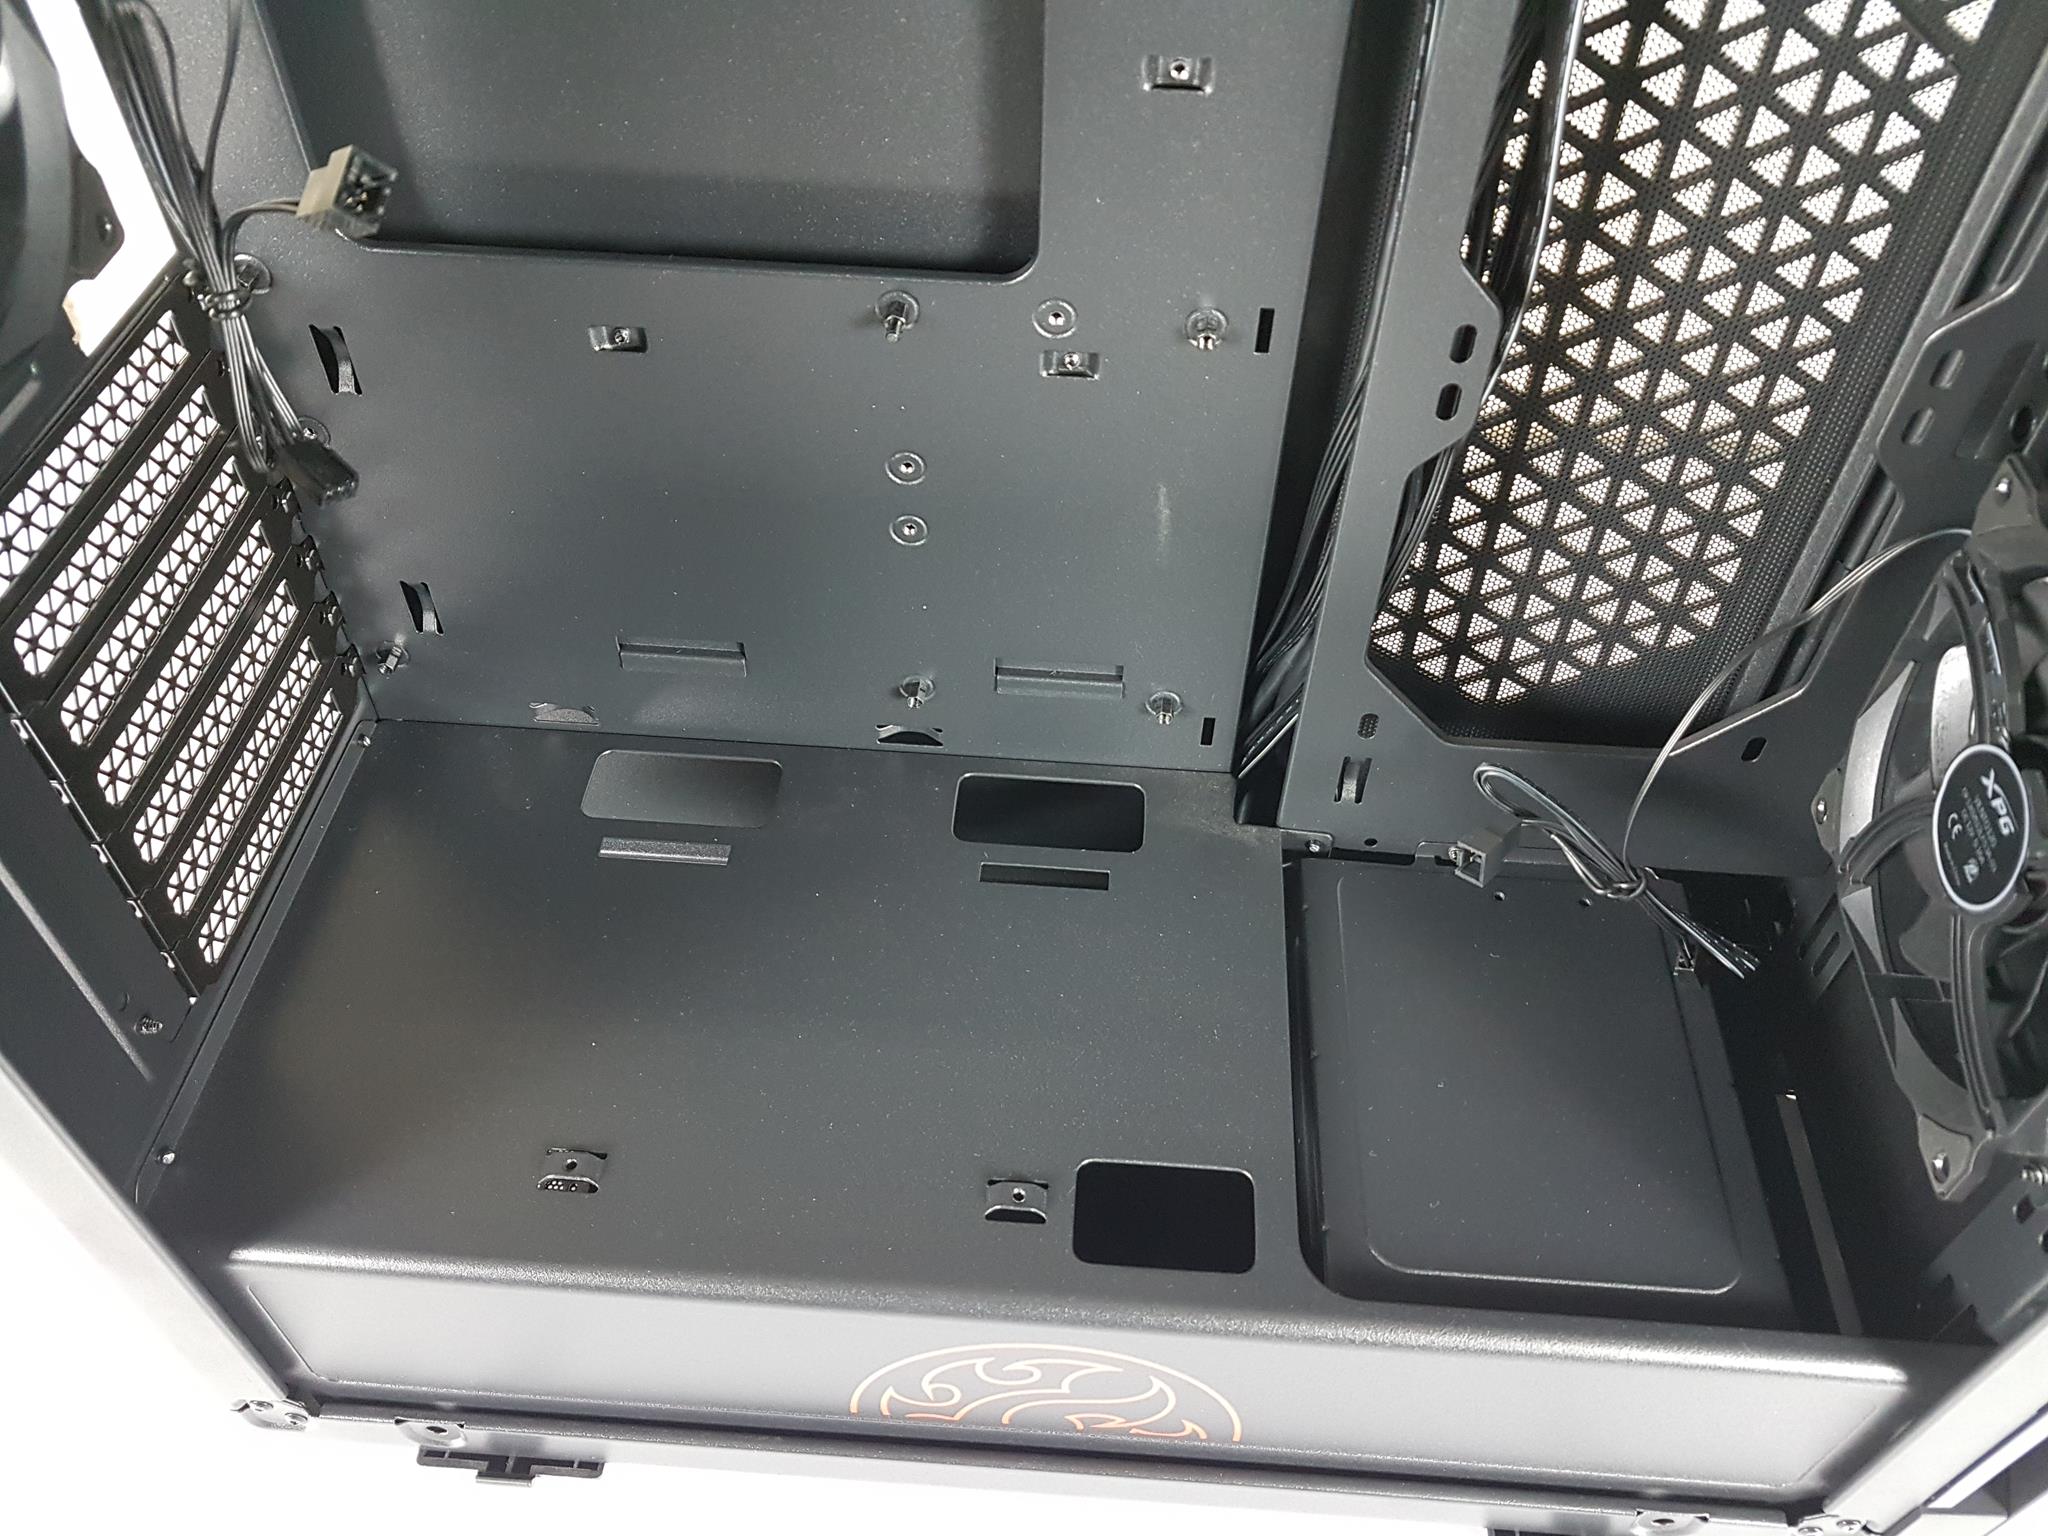 XPG INVADER Chassis Review HDD cage